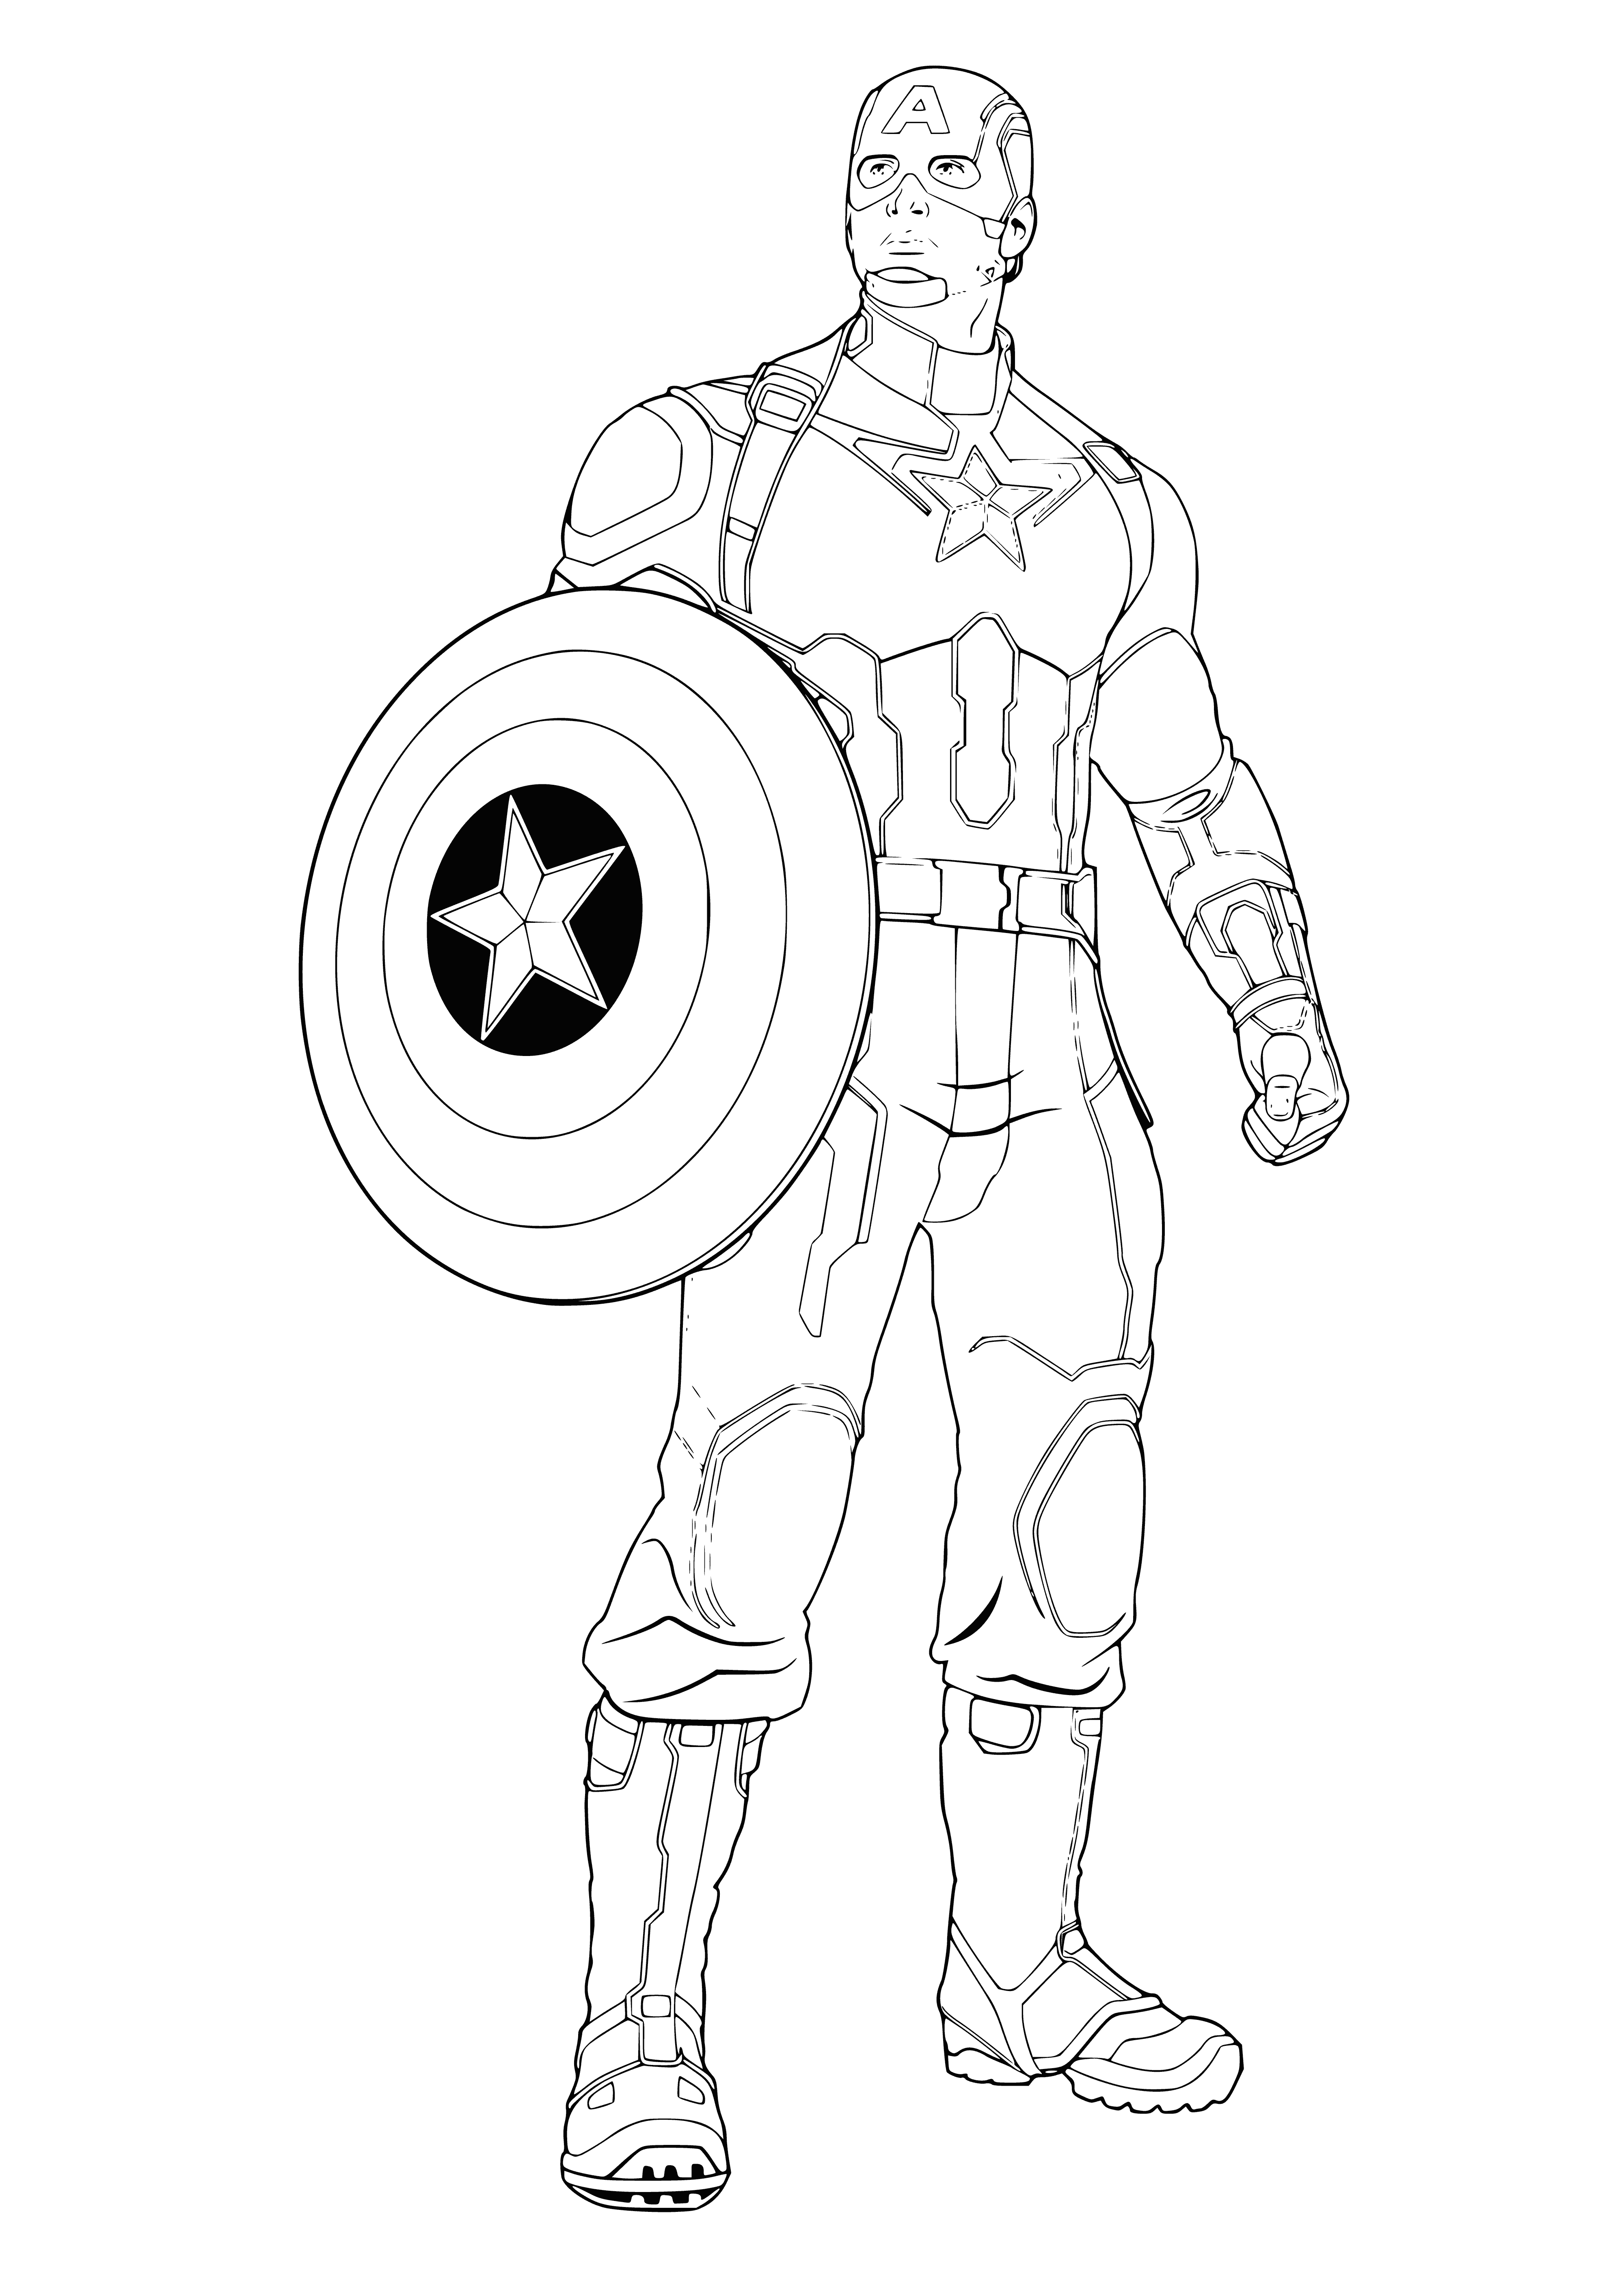 coloring page: Captain America is a patriotic Marvel superhero who, enhanced by experimental serum, fights for US in WW2. Popular & recognizable around the Marvel Universe.